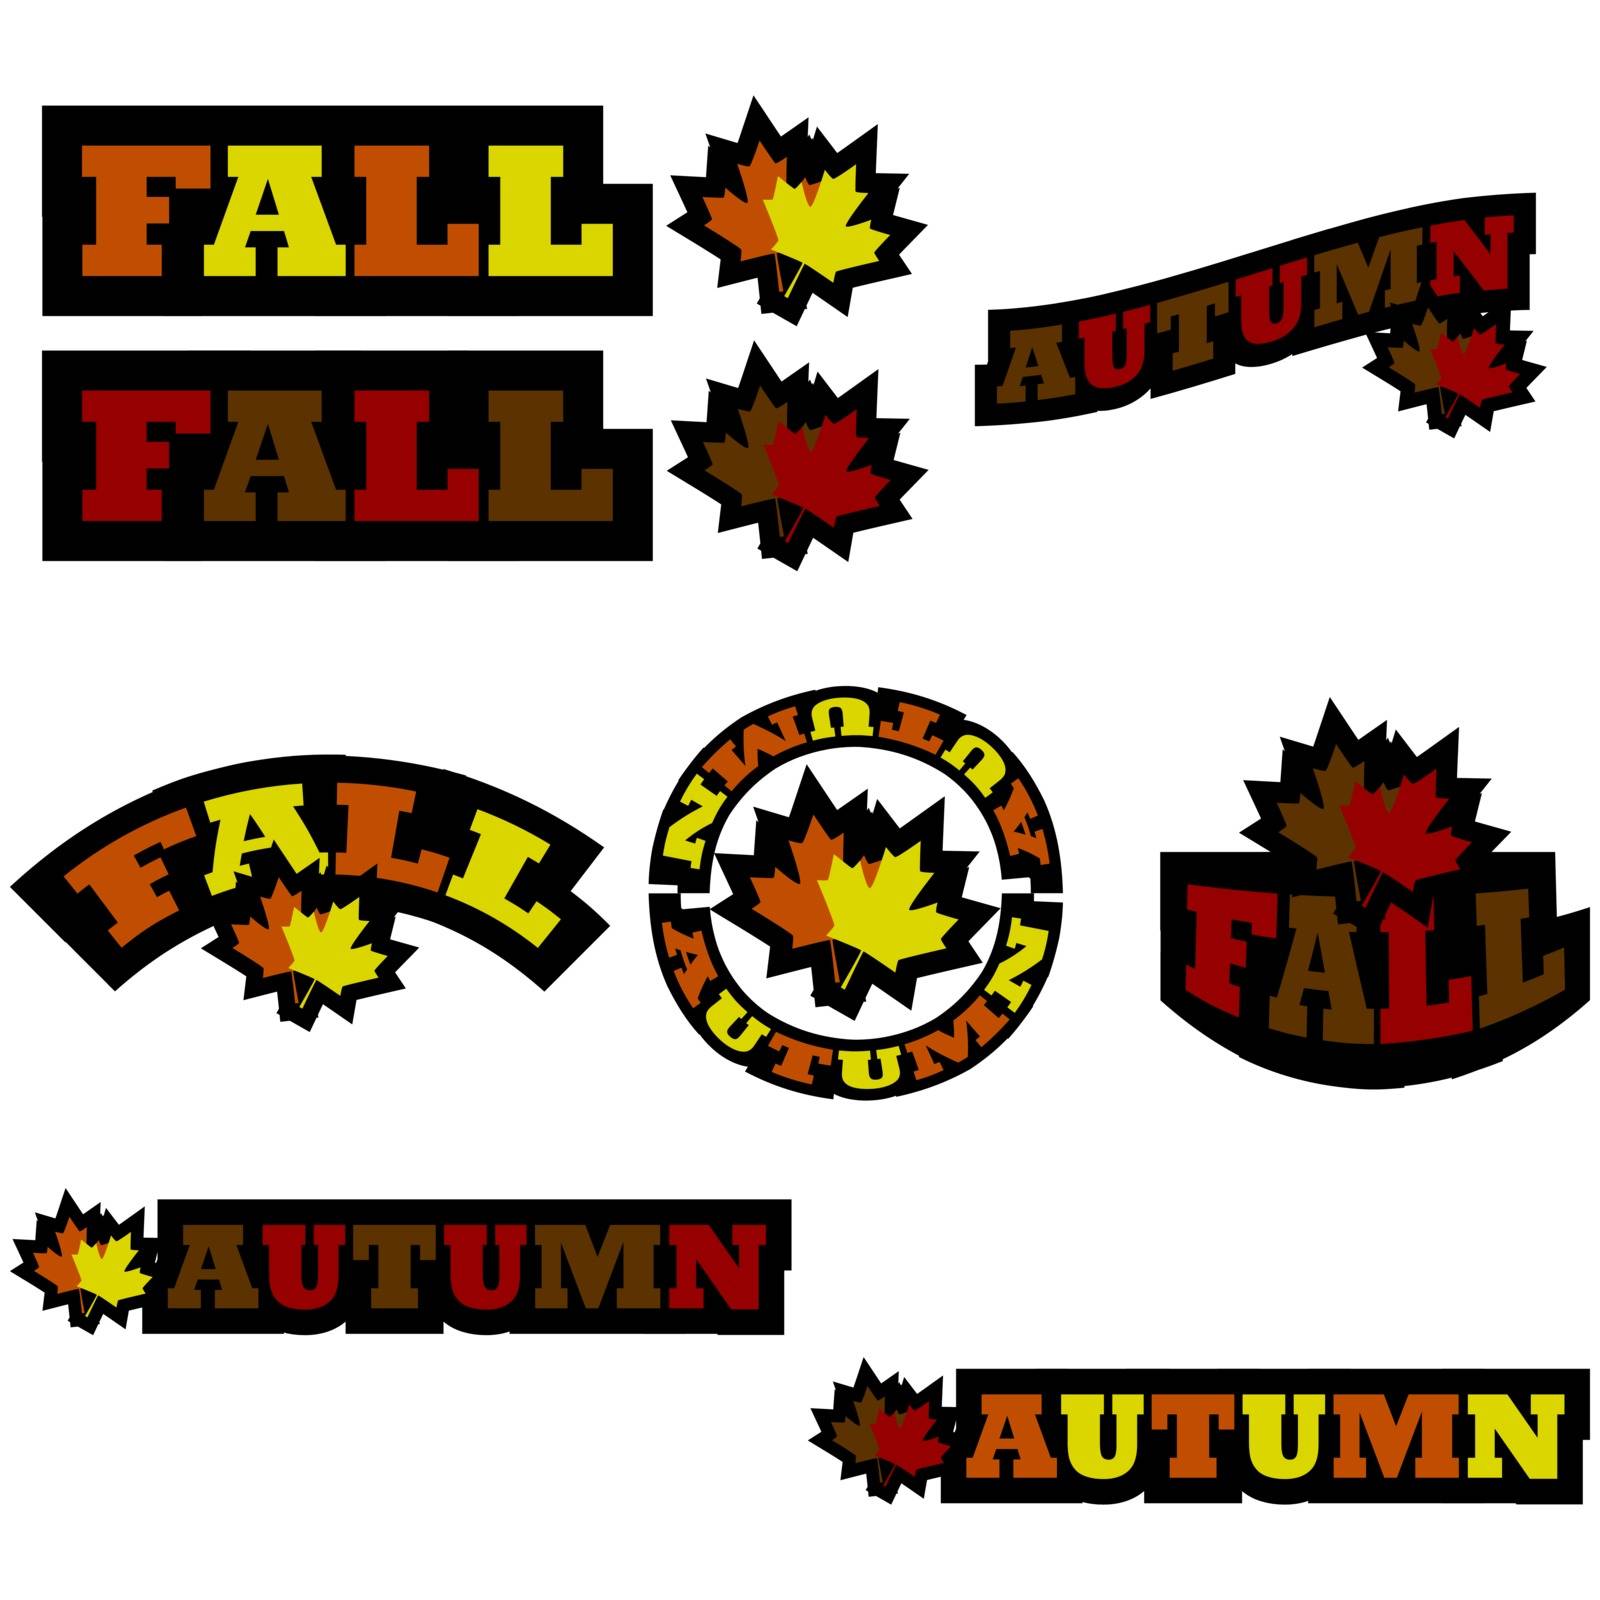 Icon set showing two maple tree leaves beside the words 'Fall' and 'Autumn'